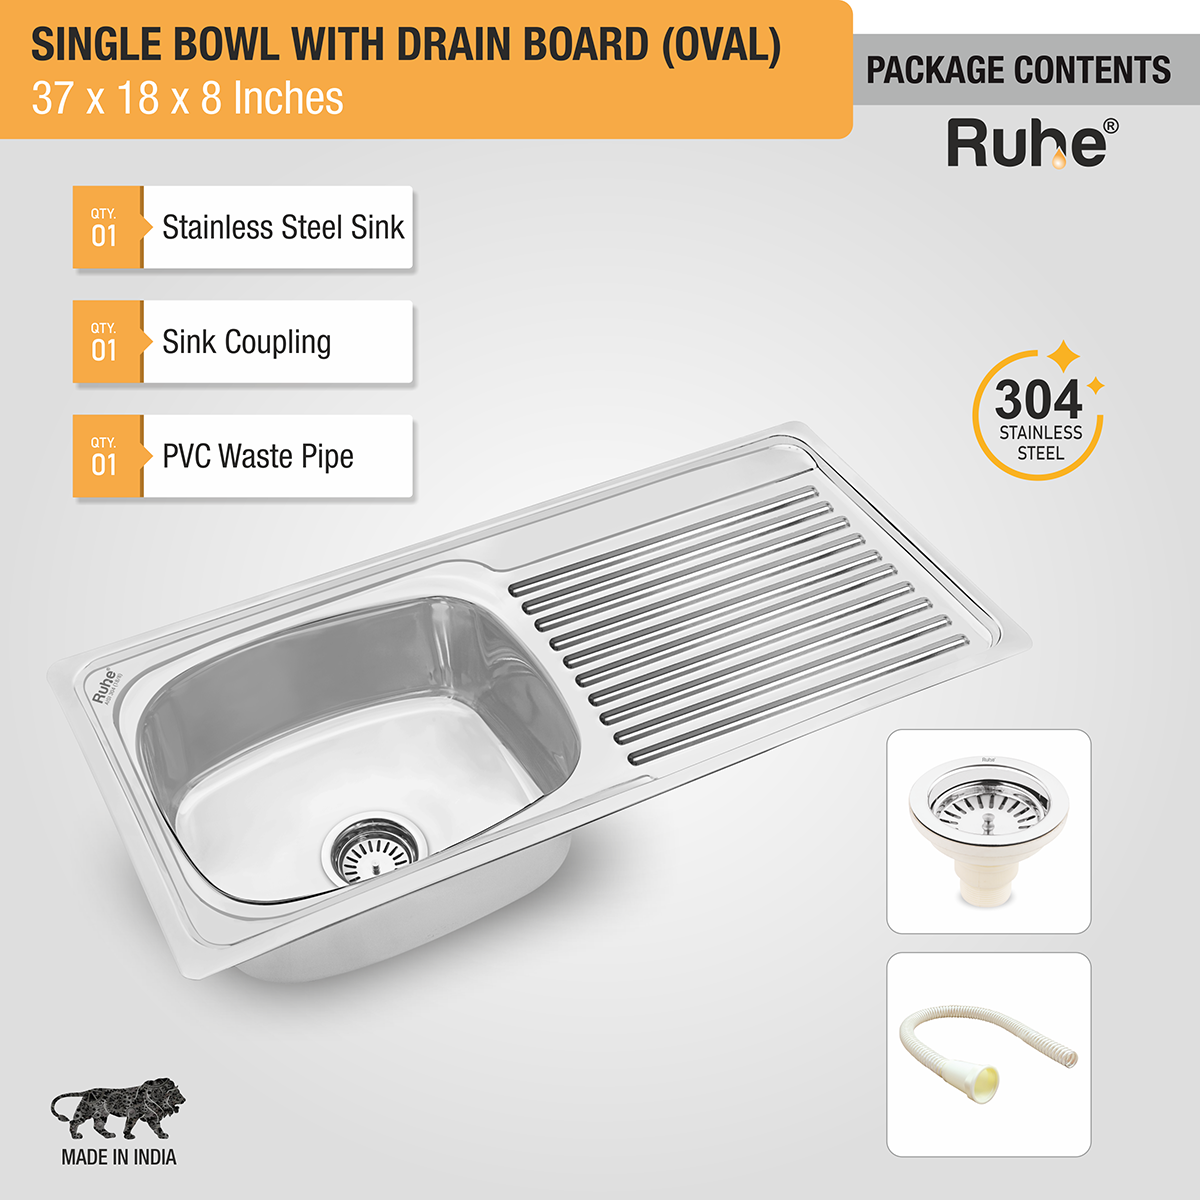 Oval Single Bowl (37 x 18 x 8 inches) 304-Grade Stainless Steel Kitchen Sink with Drainboard with coupling, pvc waste pipe